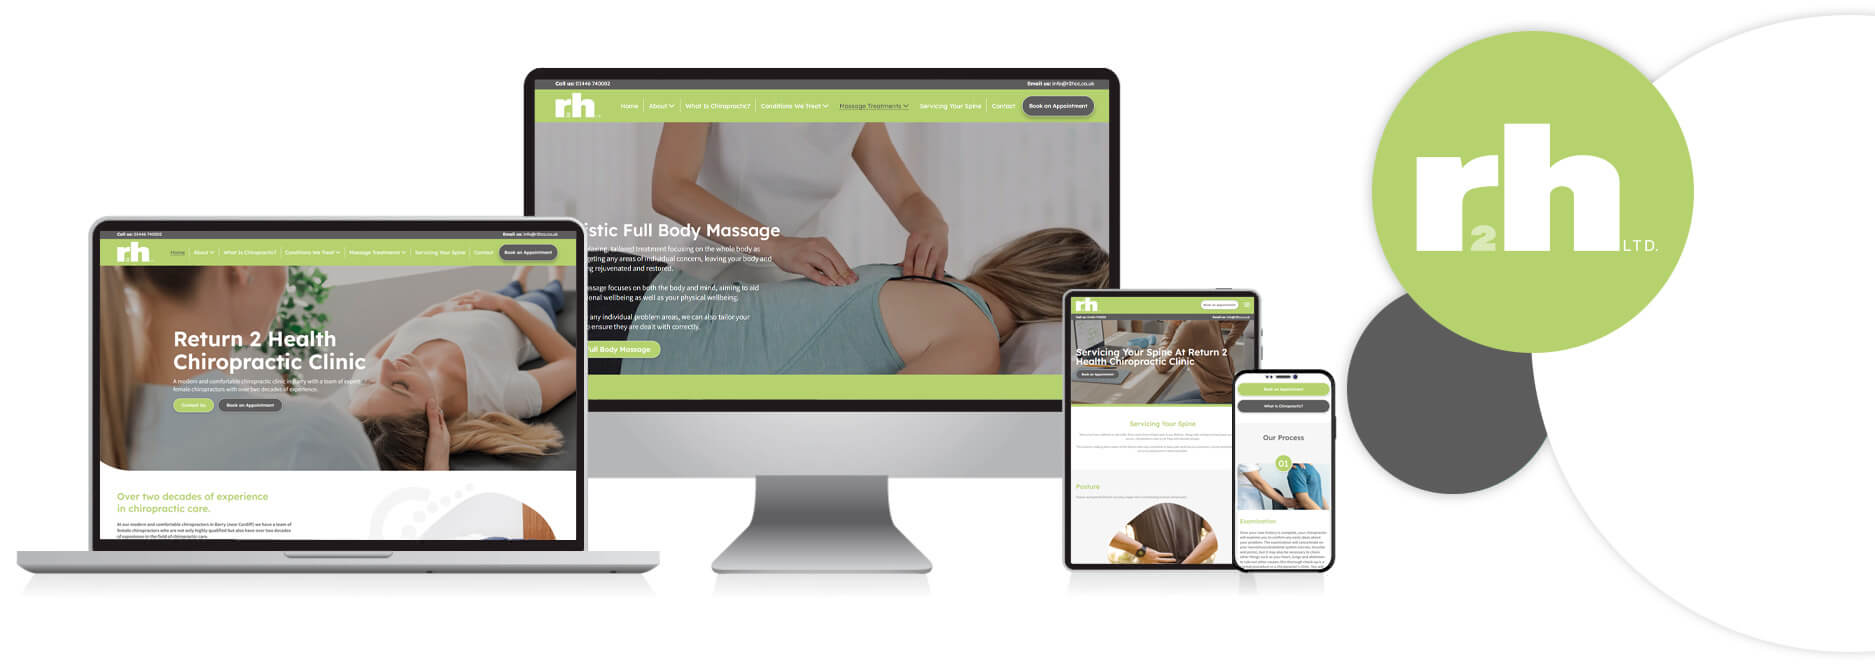 Return 2 Health Chiropractic Clinic: New Website for Chiropractic Clinic in Barry